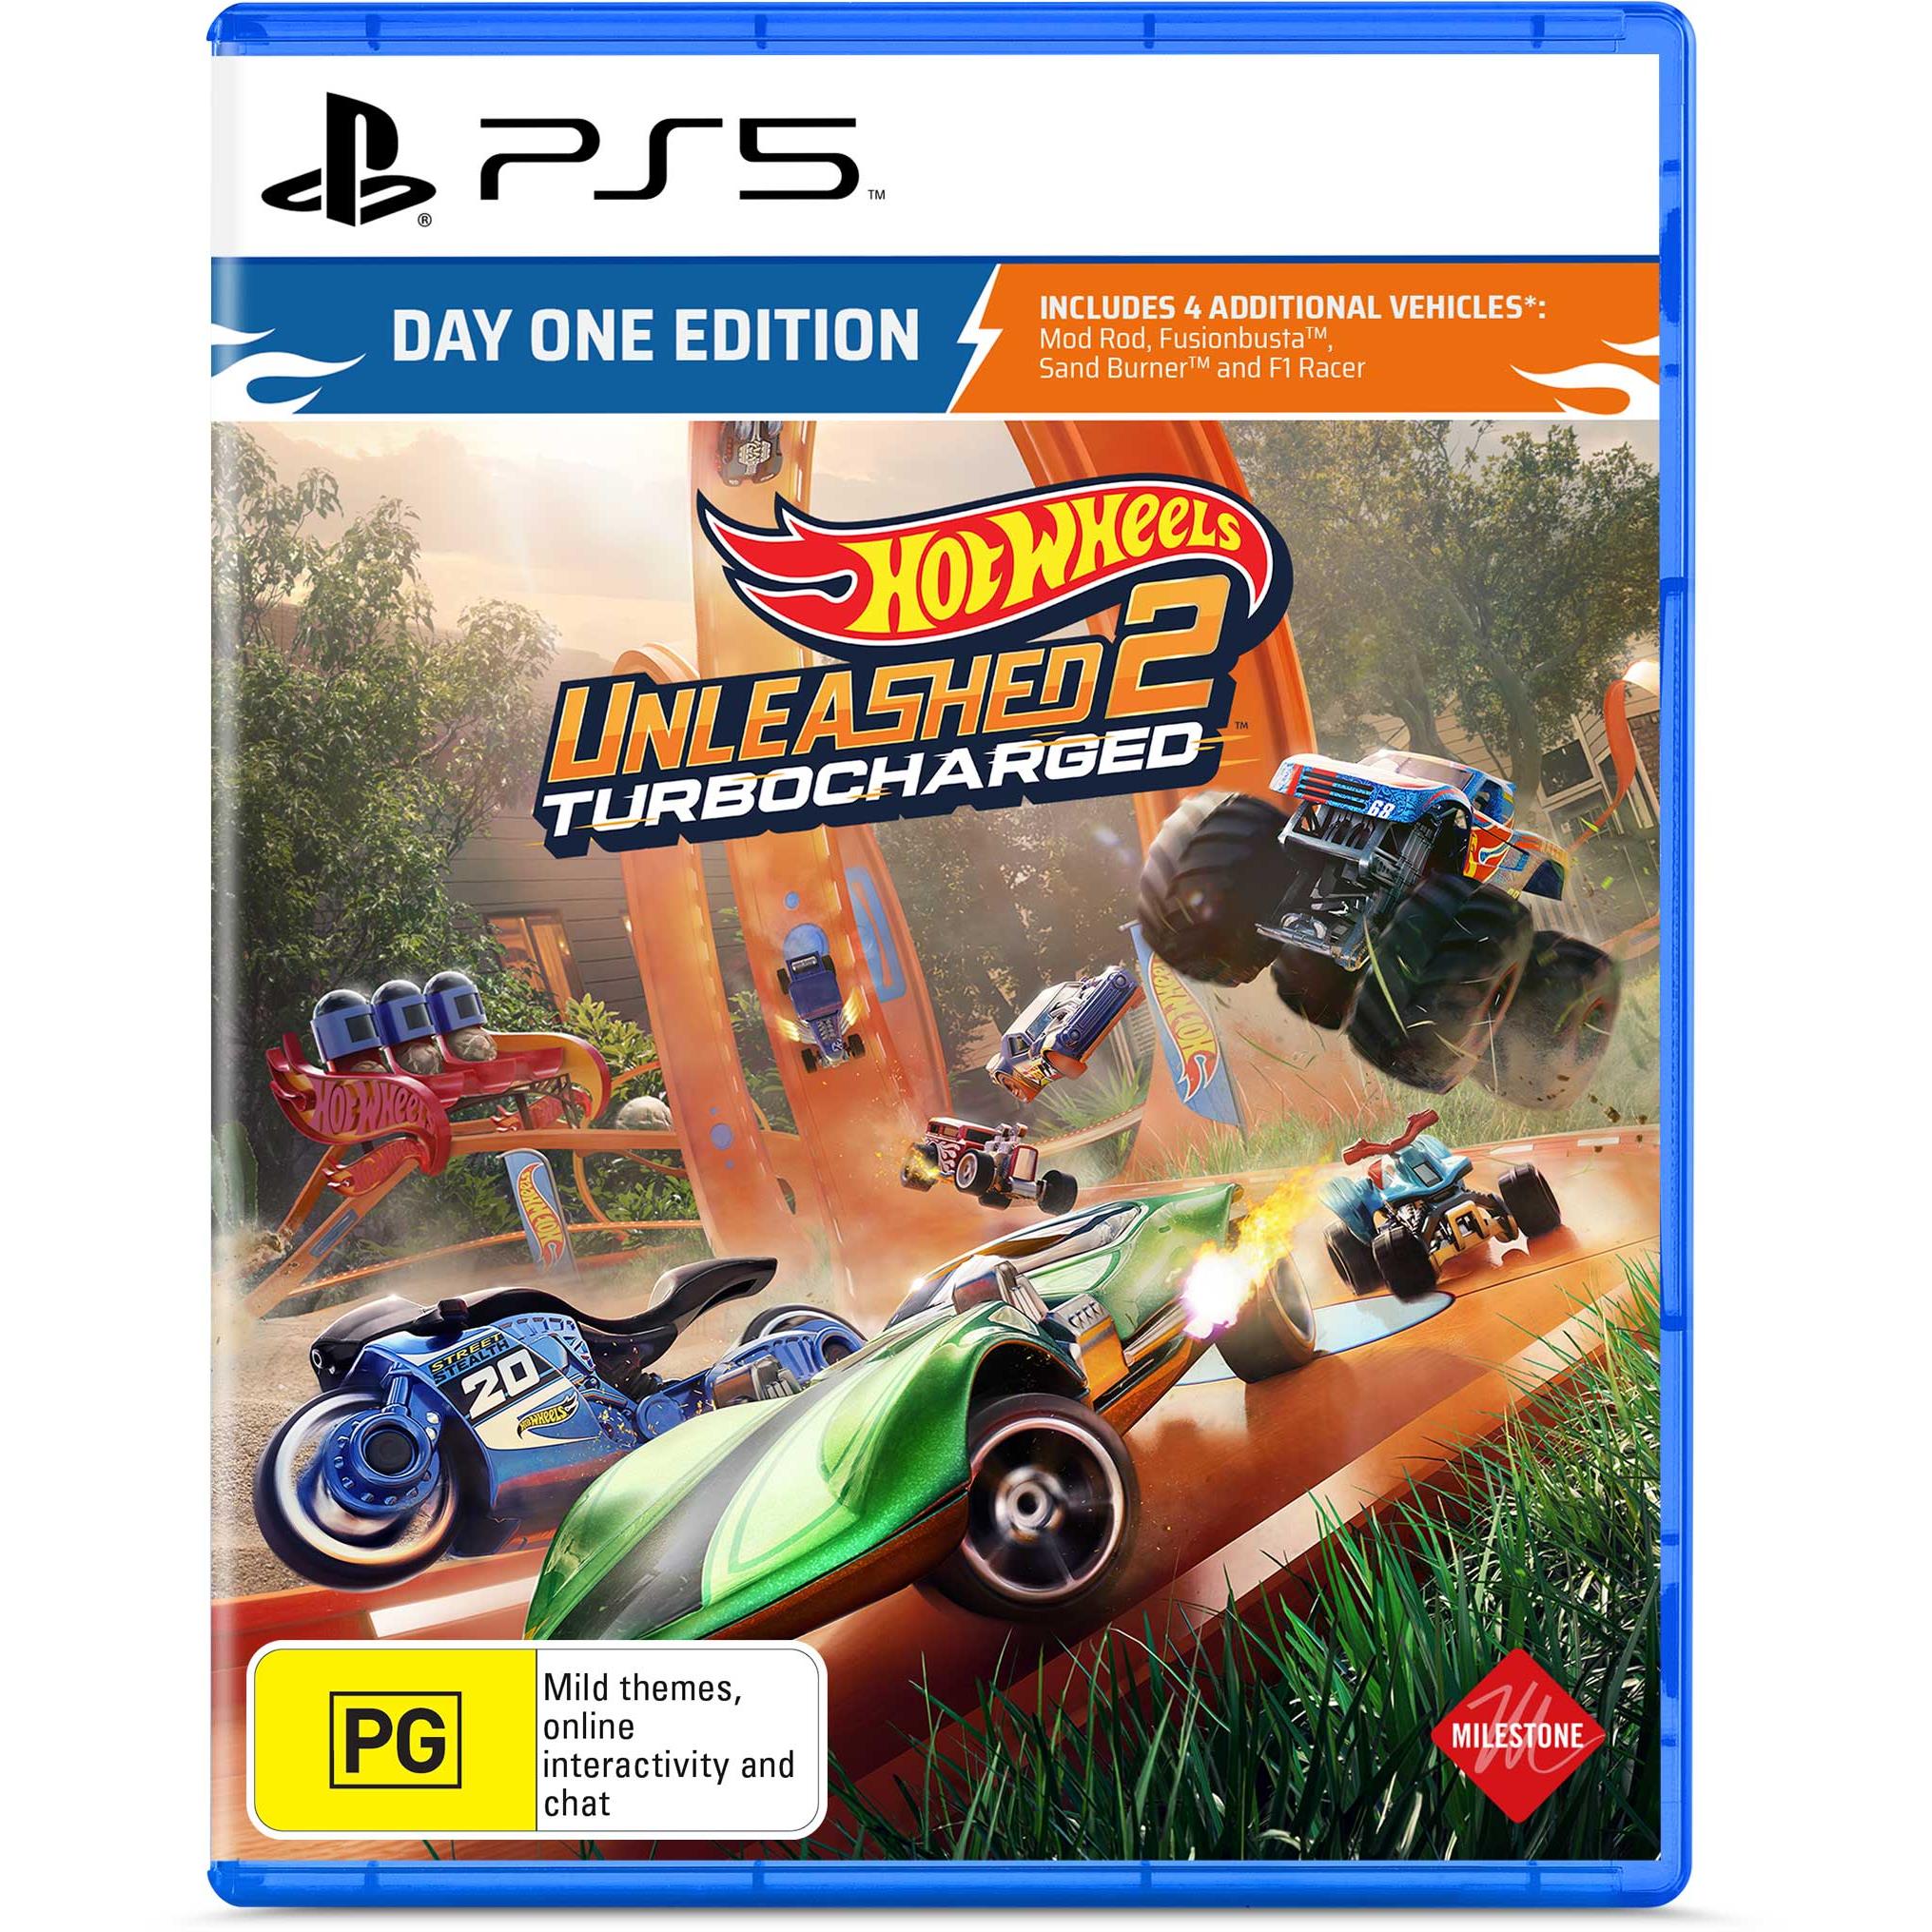 HOT WHEELS UNLEASHED™ 2 - Turbocharged on Steam